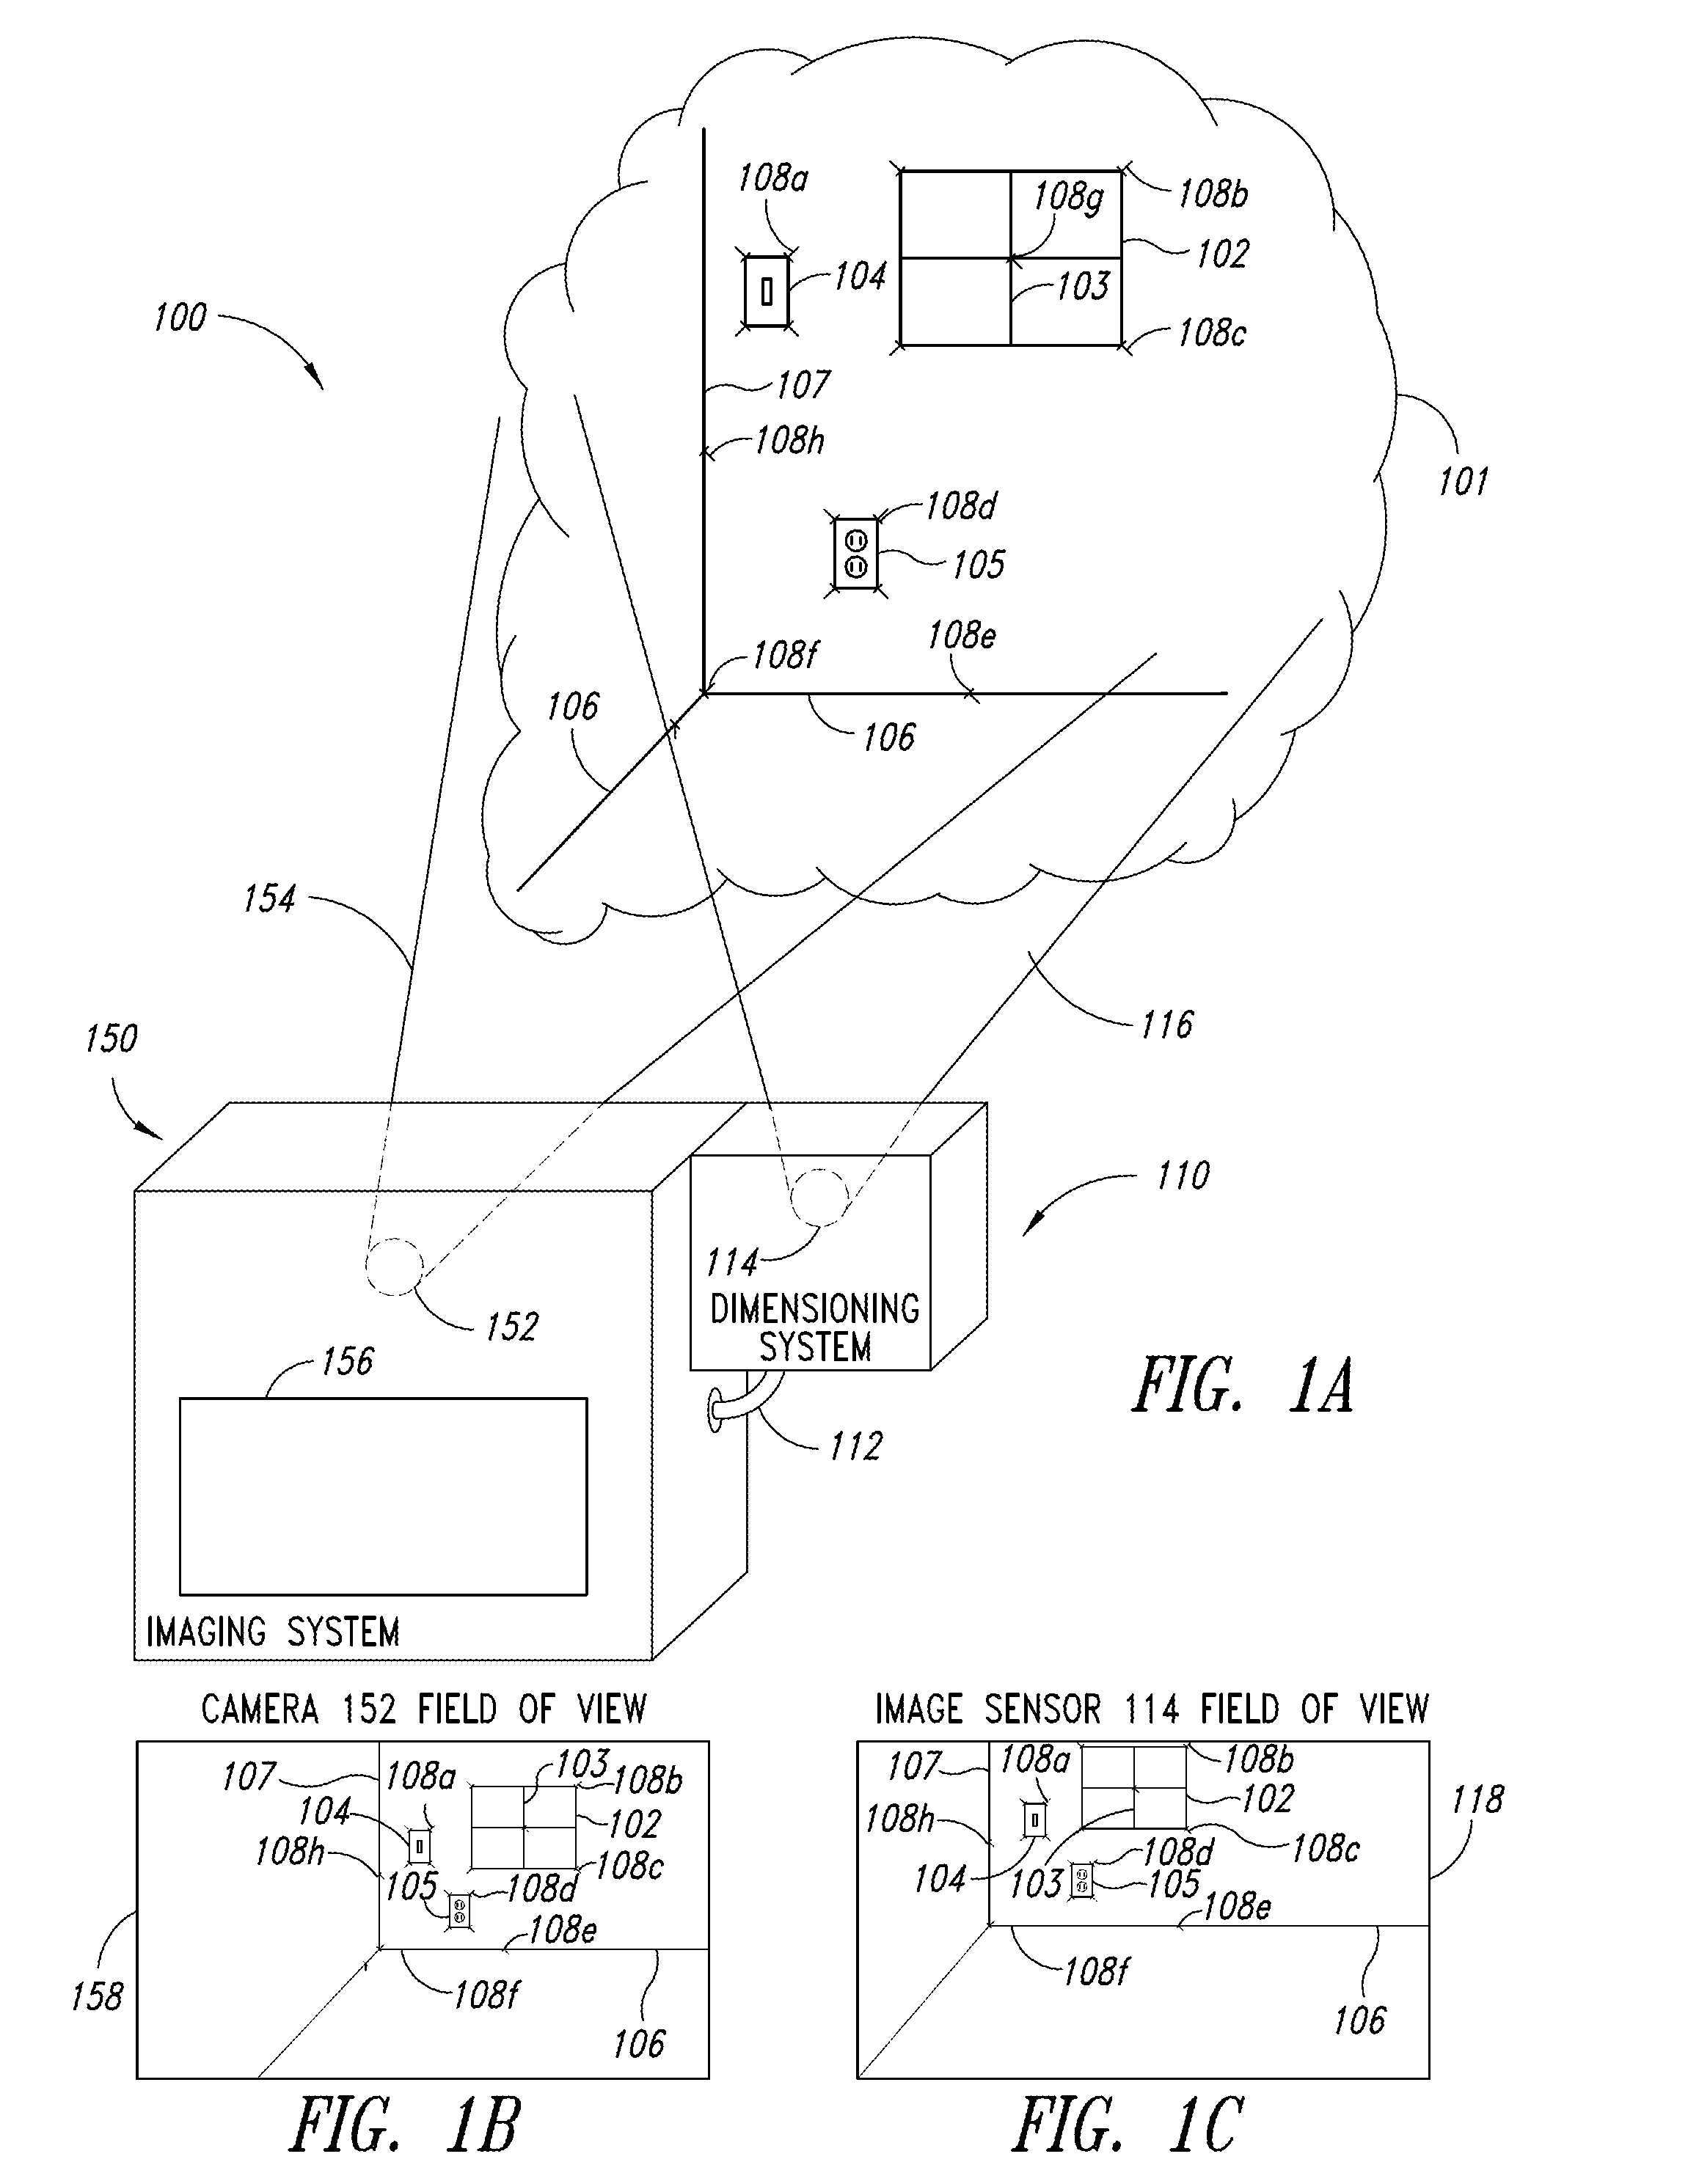 Dimensioning system calibration systems and methods